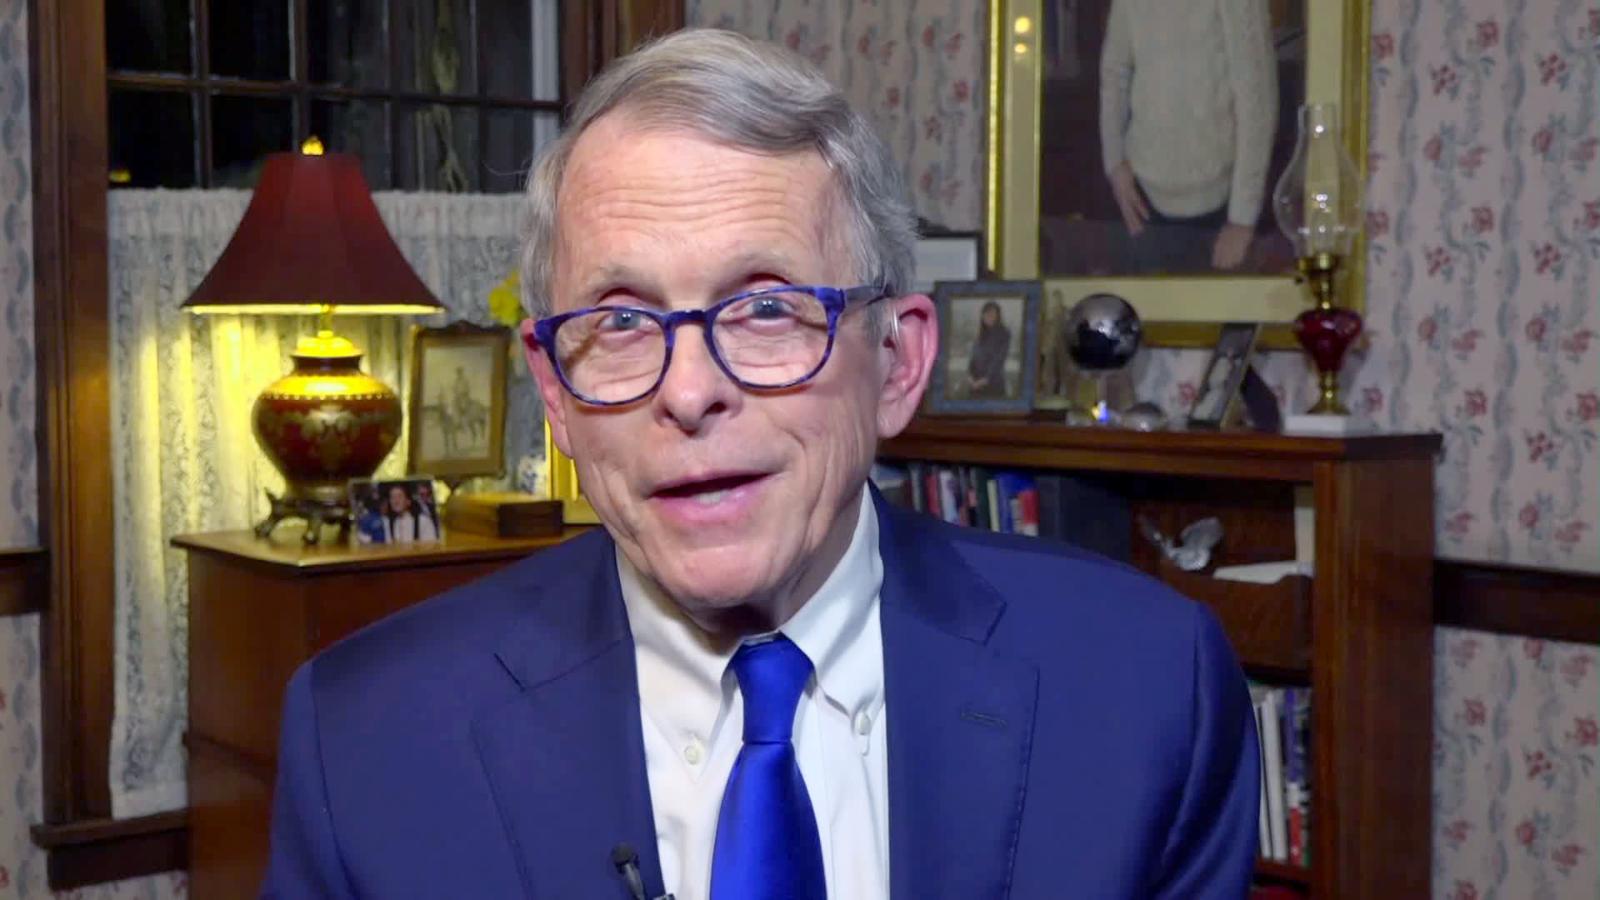 Mike DeWine Ohio Republican governor says wearing a mask is 'about